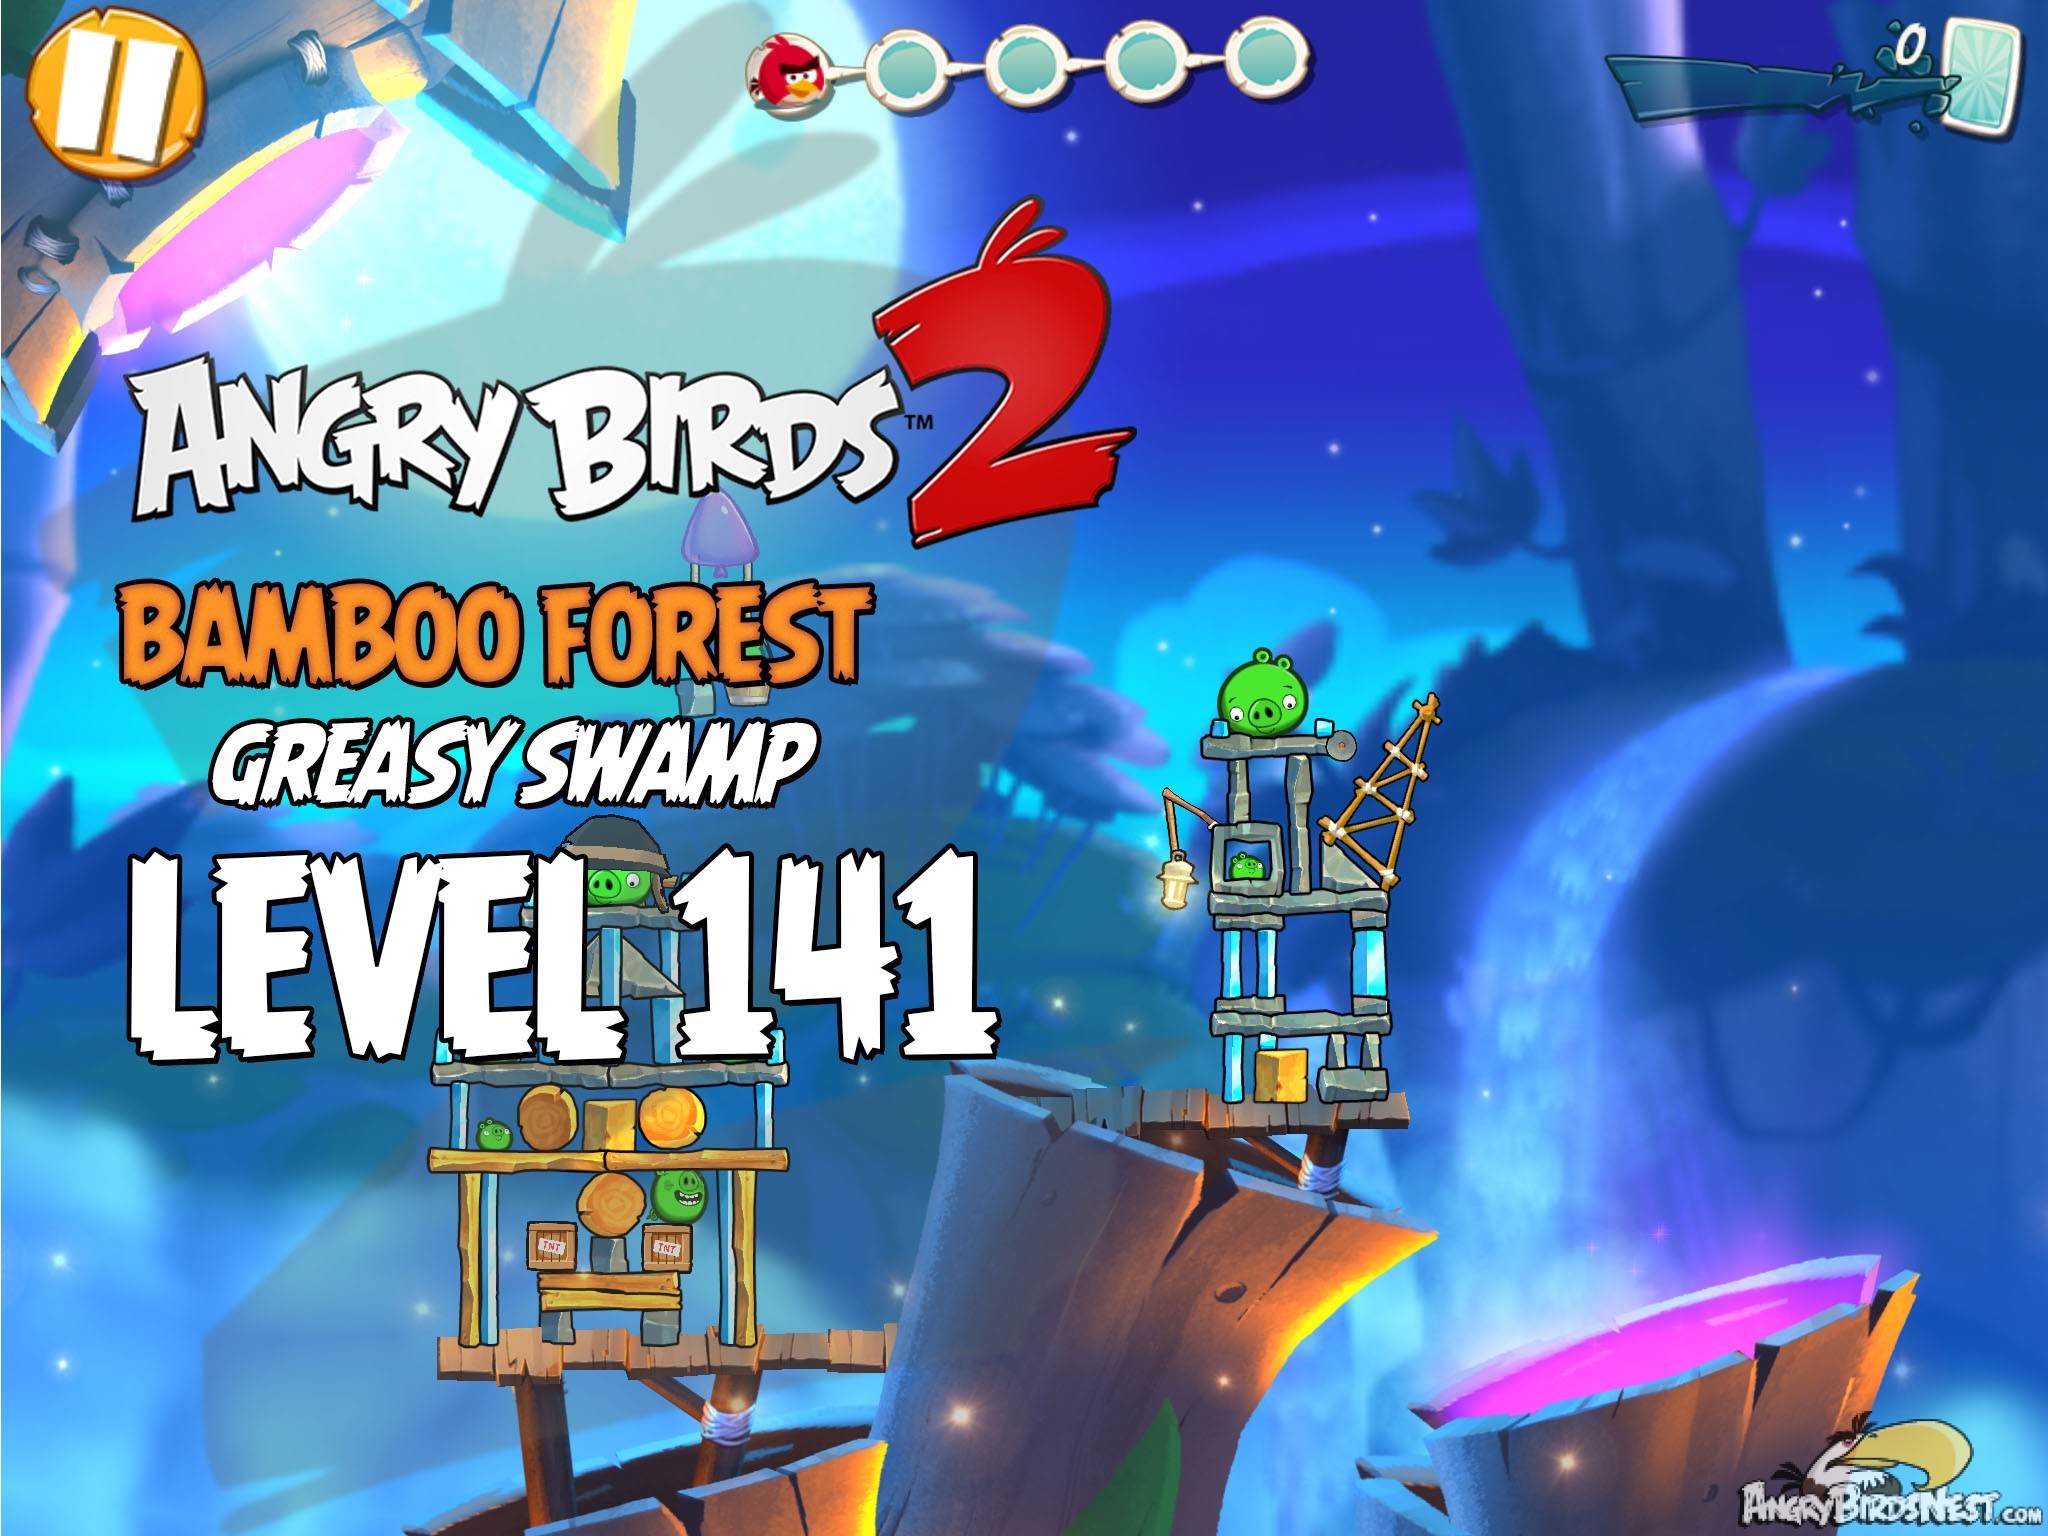 Angry Birds 2 Bamboo Forest Greasy Swamp Level 141